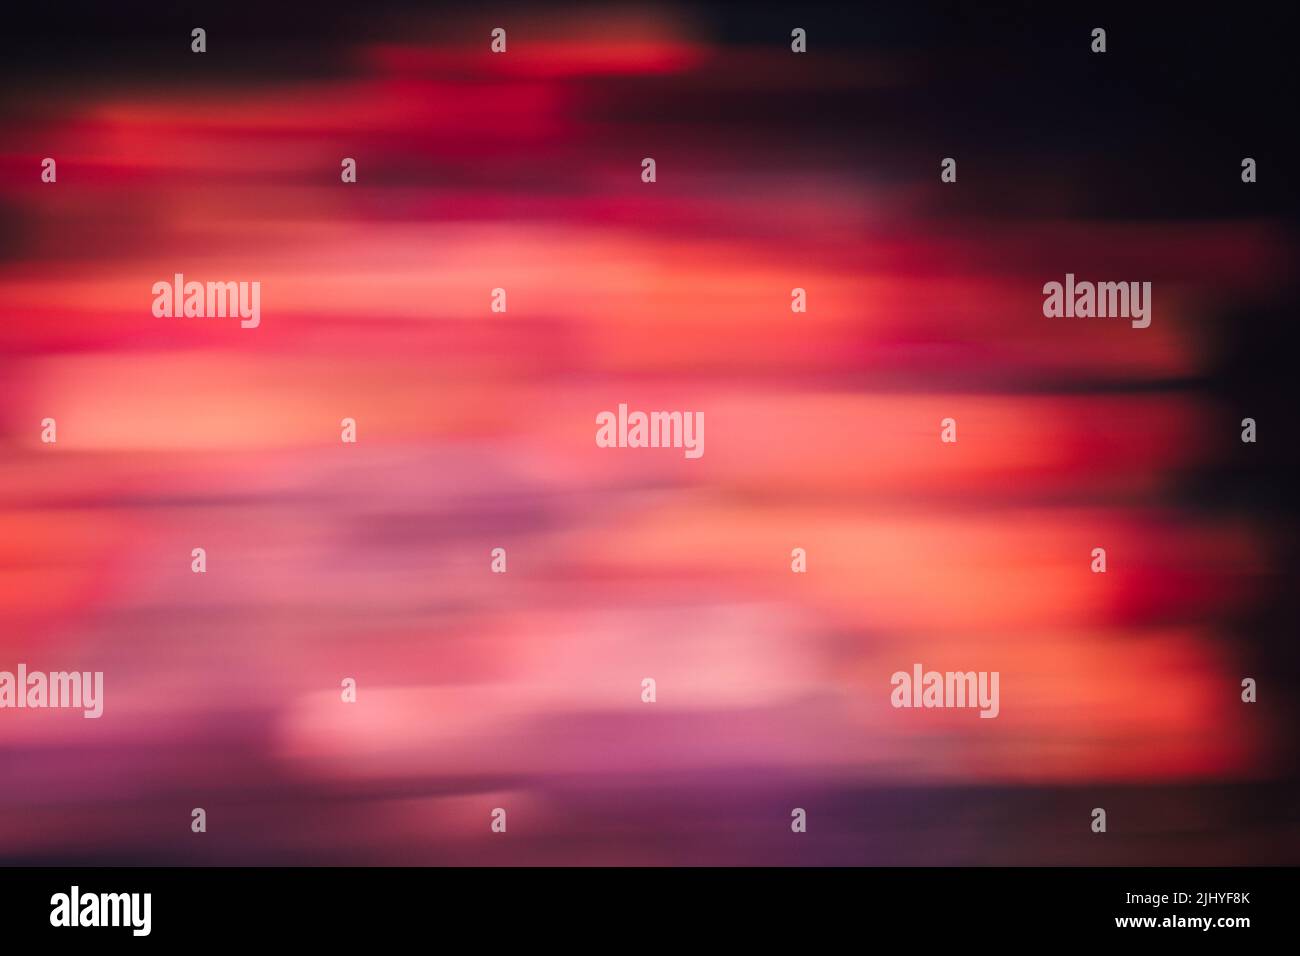 Abstract background of colorful blurs in motion Stock Photo